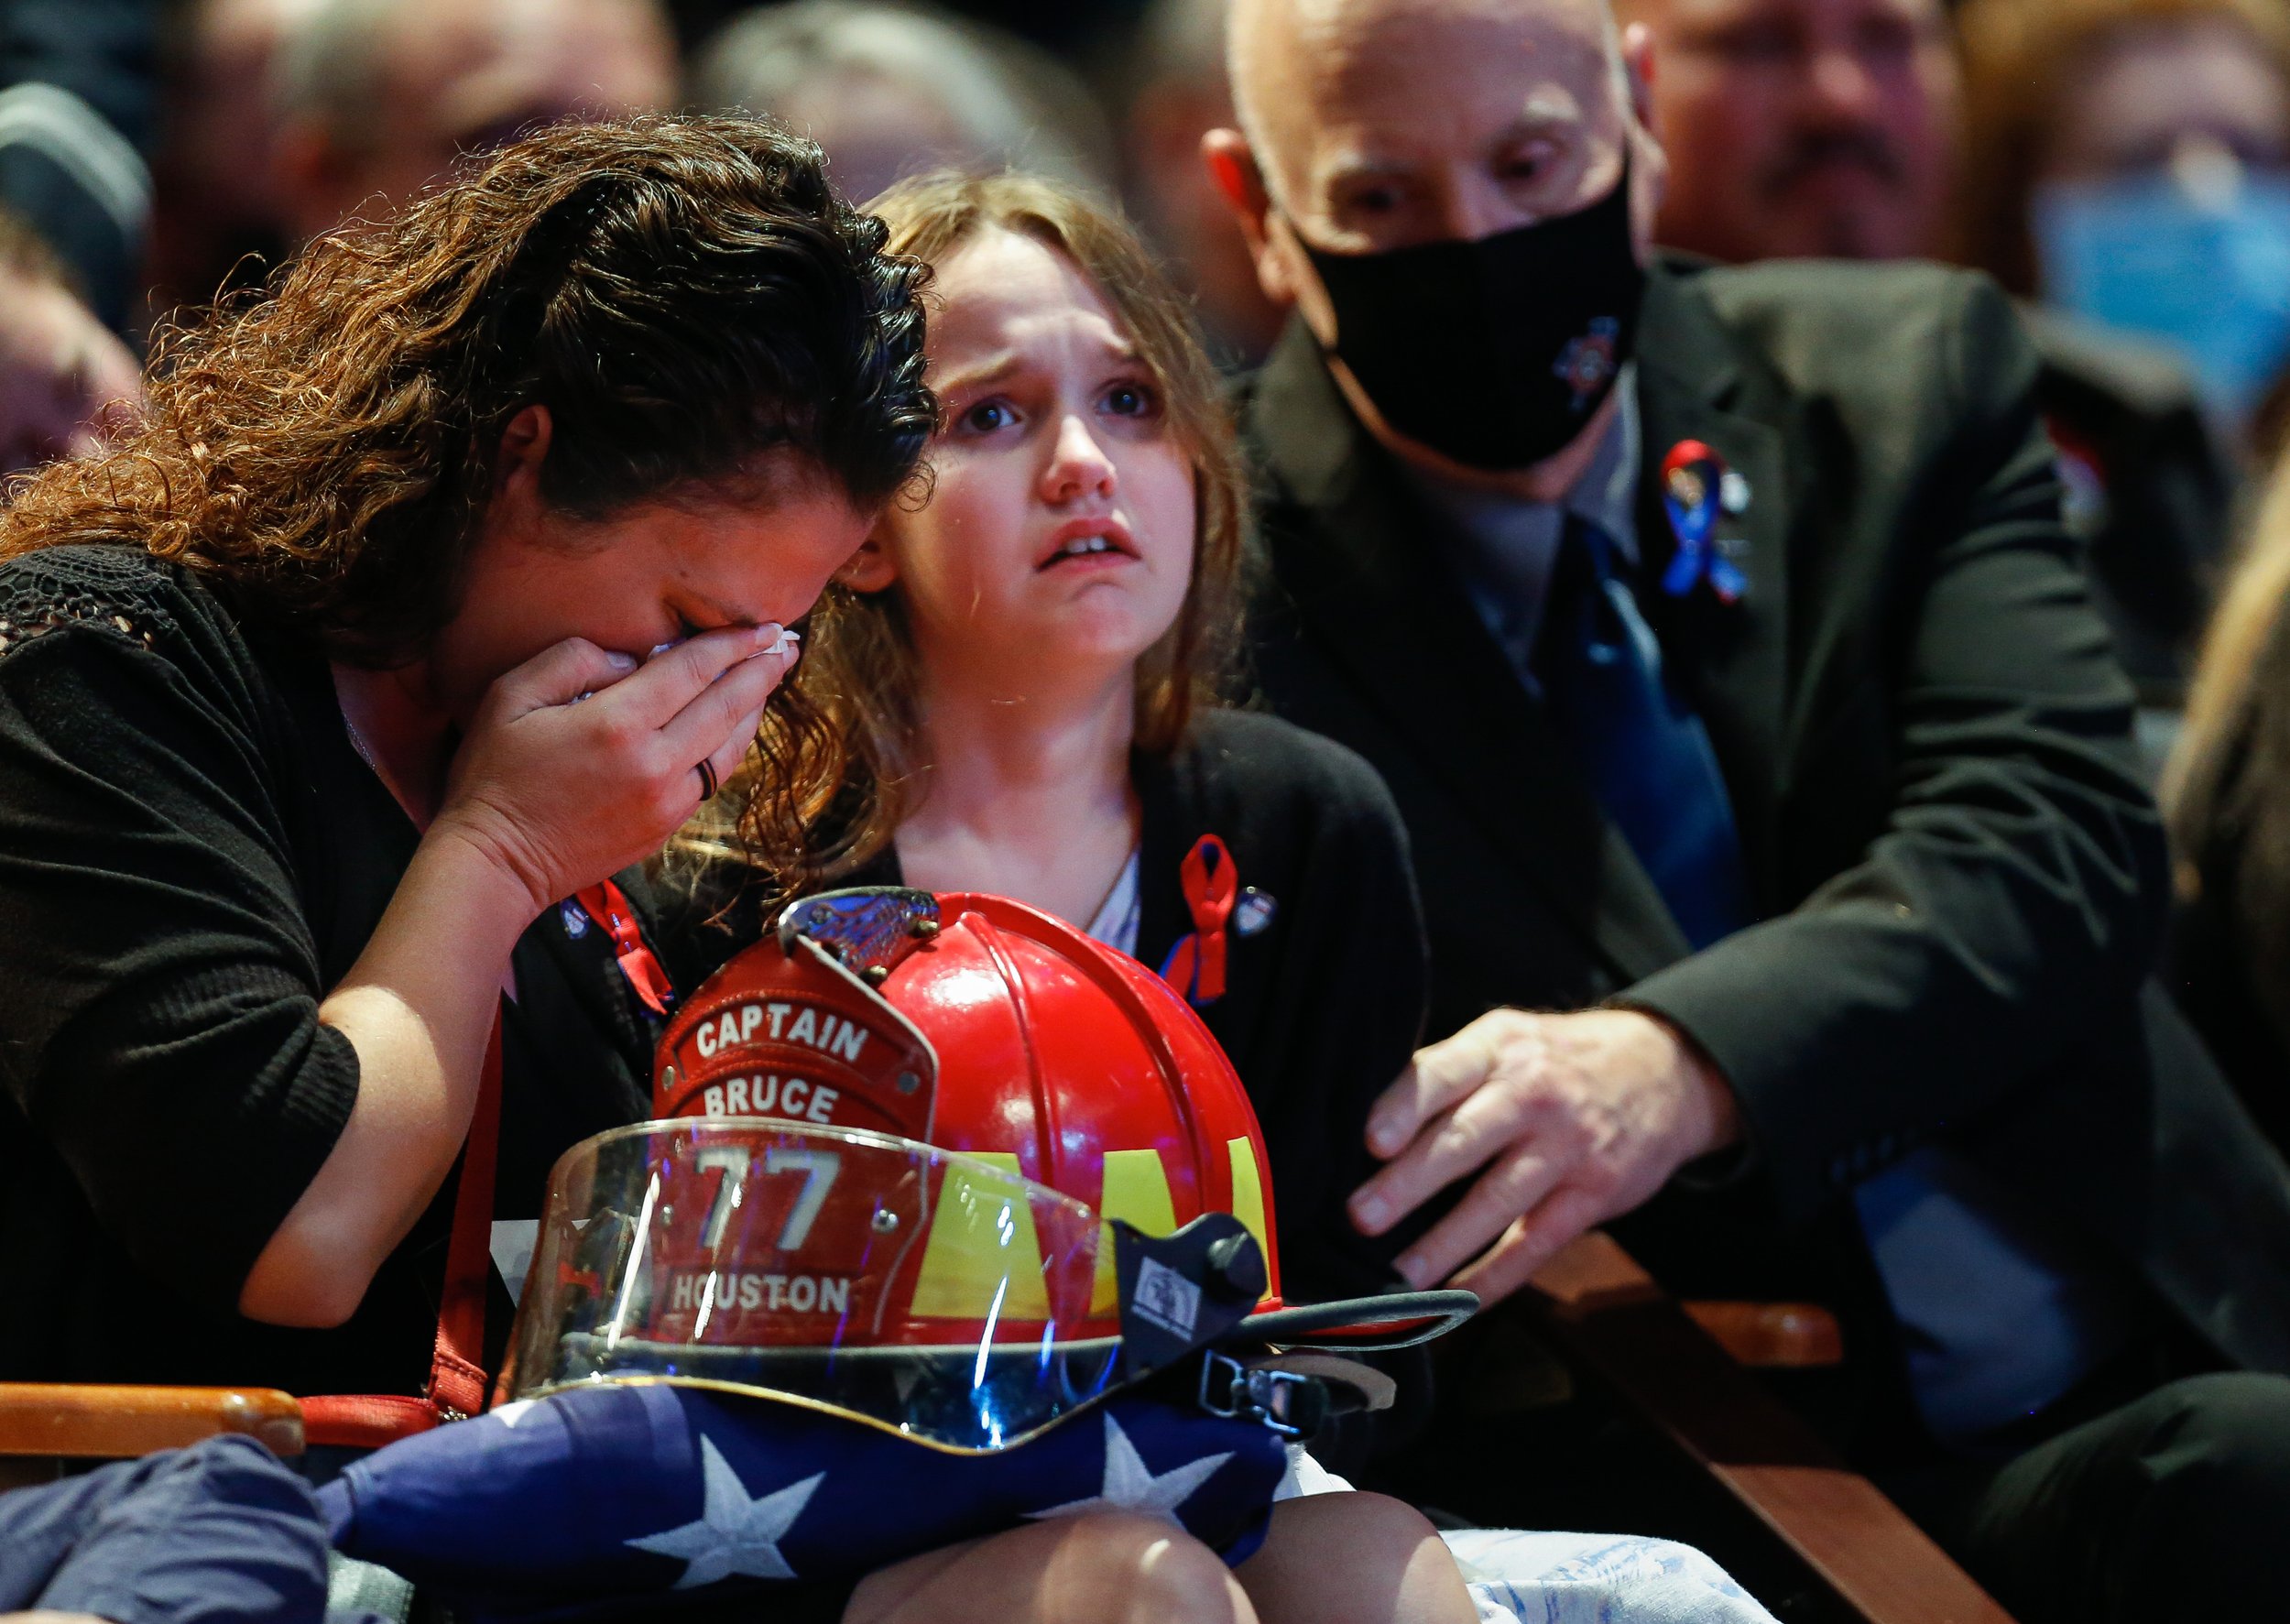  Rachel Bruce, left, and her daughter Sydney grieve as the Houston Fire Department honors her husband, arson investigator Lemuel Bruce, at a memorial service Lakewood Church on Thursday, Oct. 22, 2020, in Houston, Texas. Bruce, 44, died while he was 